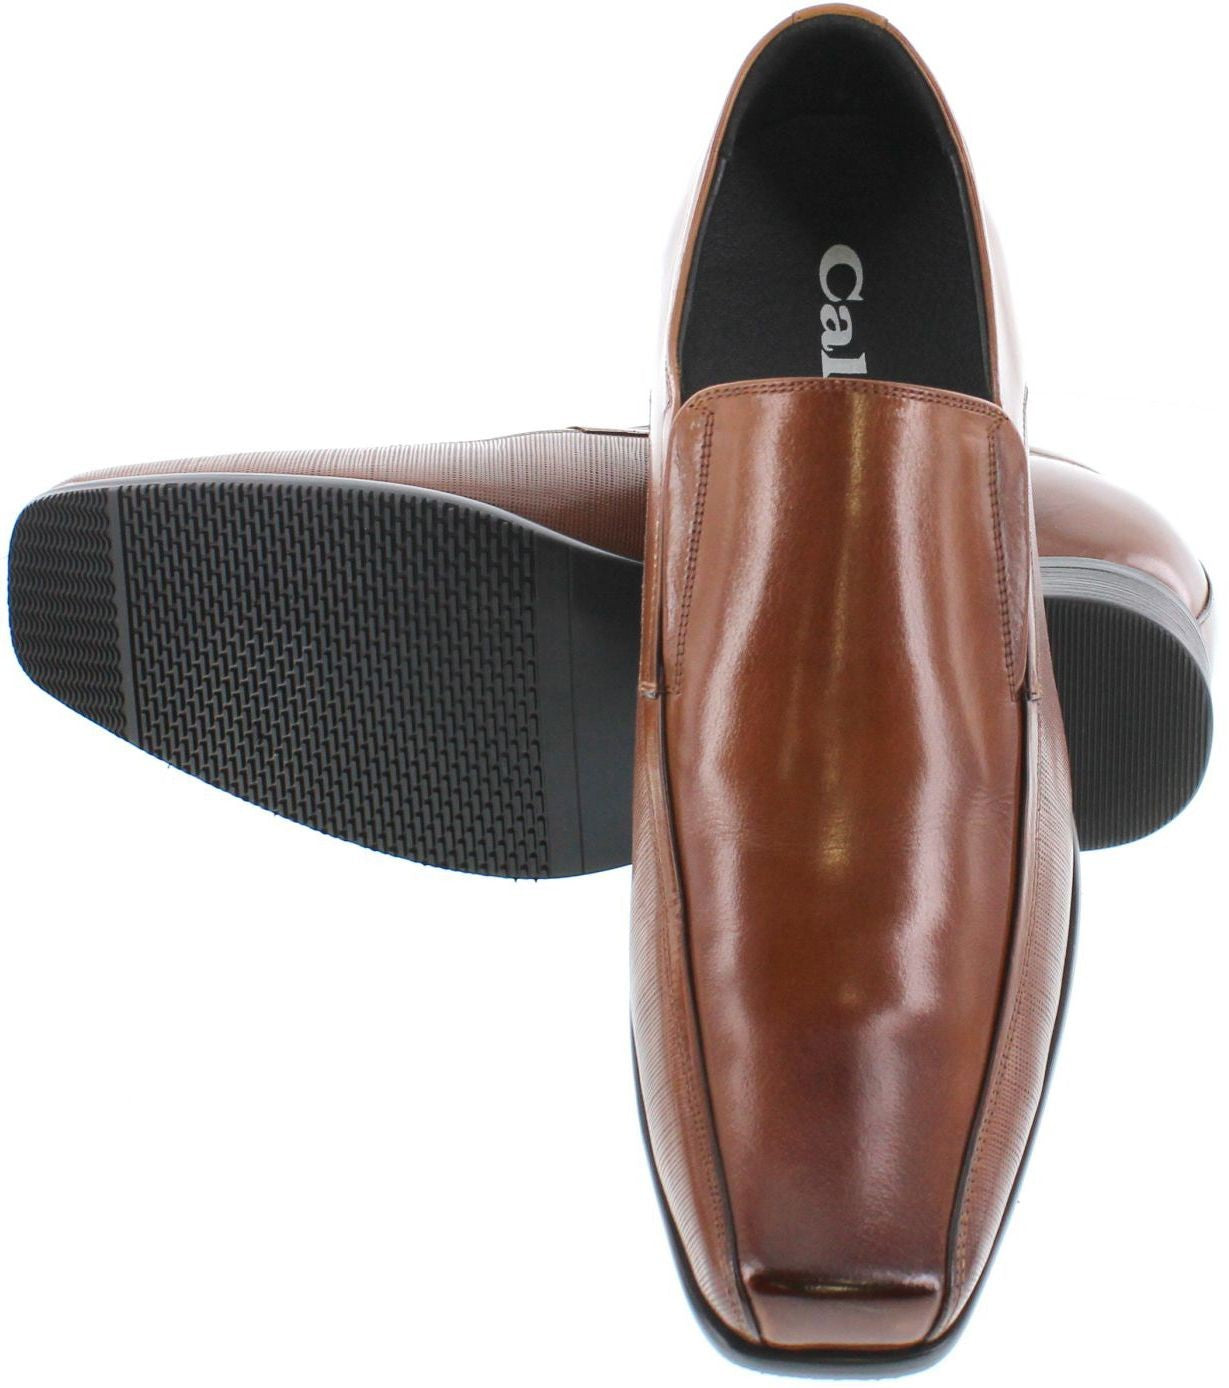 Elevator shoes height increase CALTO Slip-On Brown Leather Dress Shoes - Three Inches - Y3022